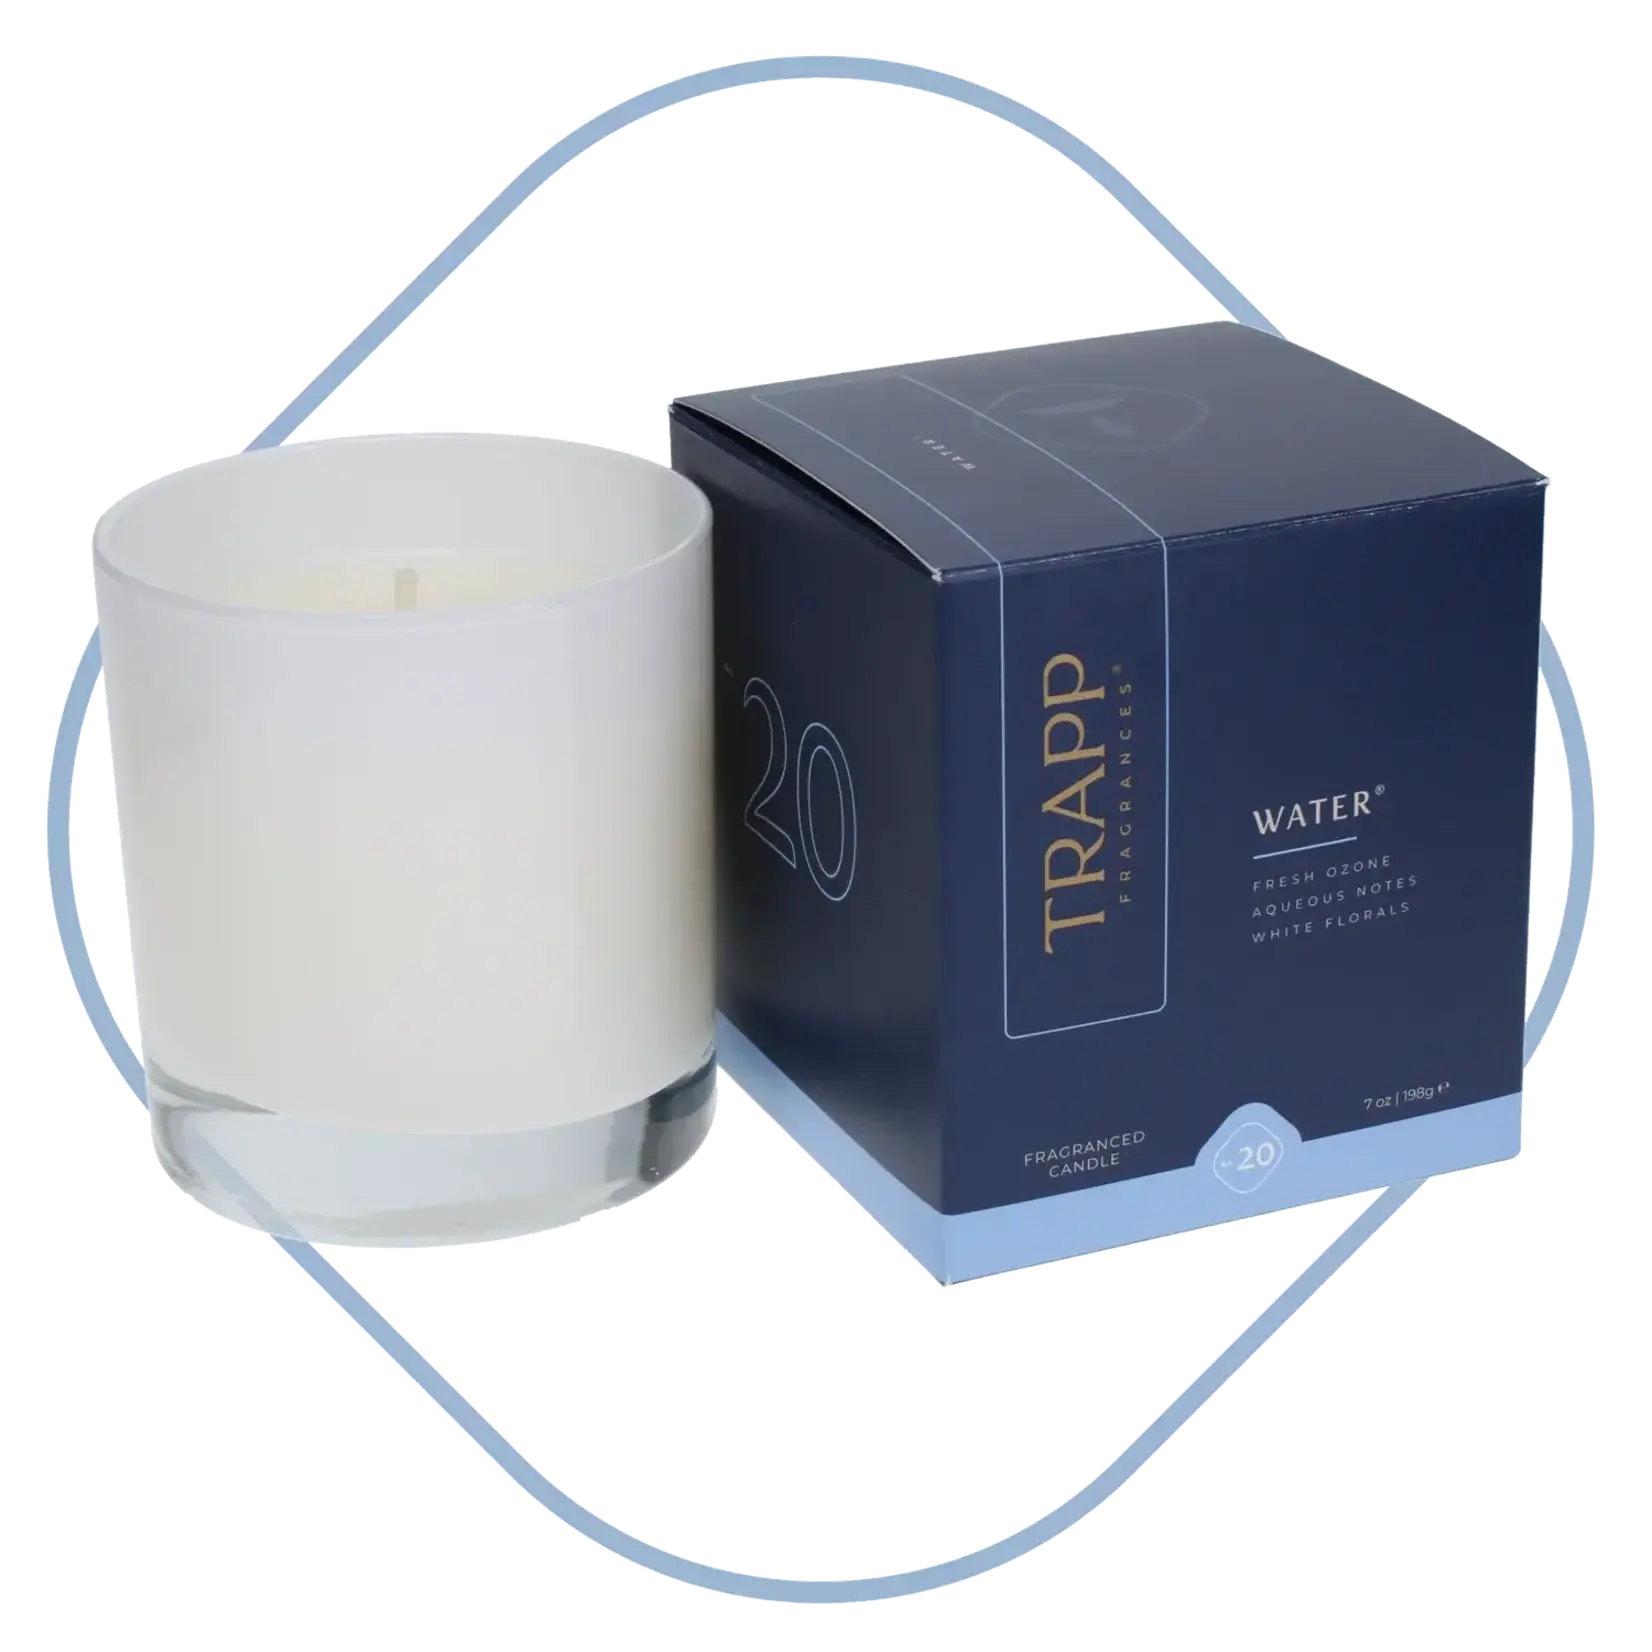 Trapp Candles No. 20 Water 7 oz. Poured Candle